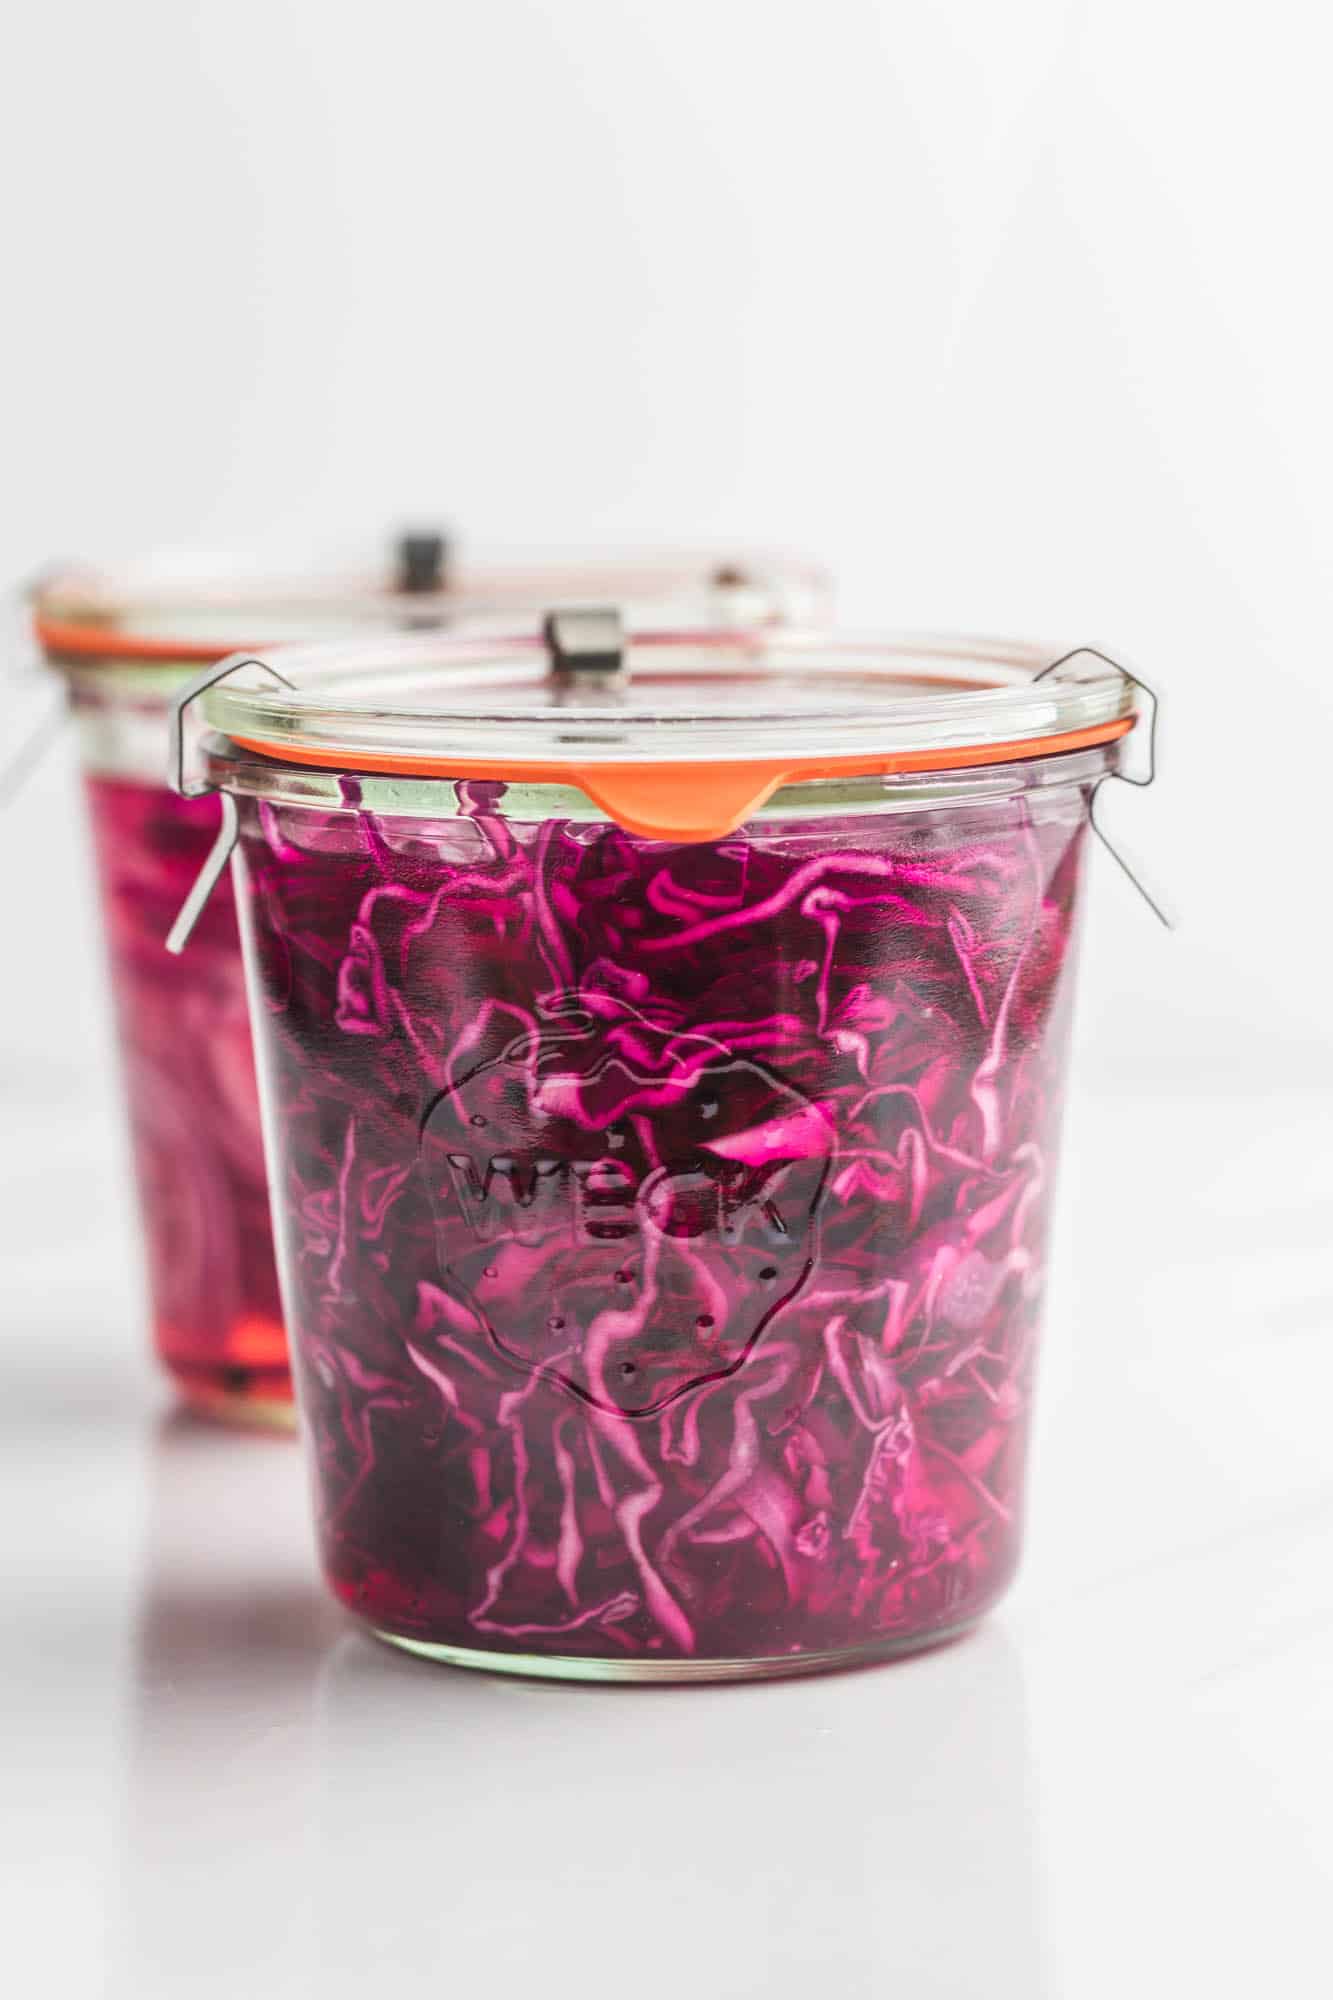 Weck jar with pickled red cabbage, sealed jars.